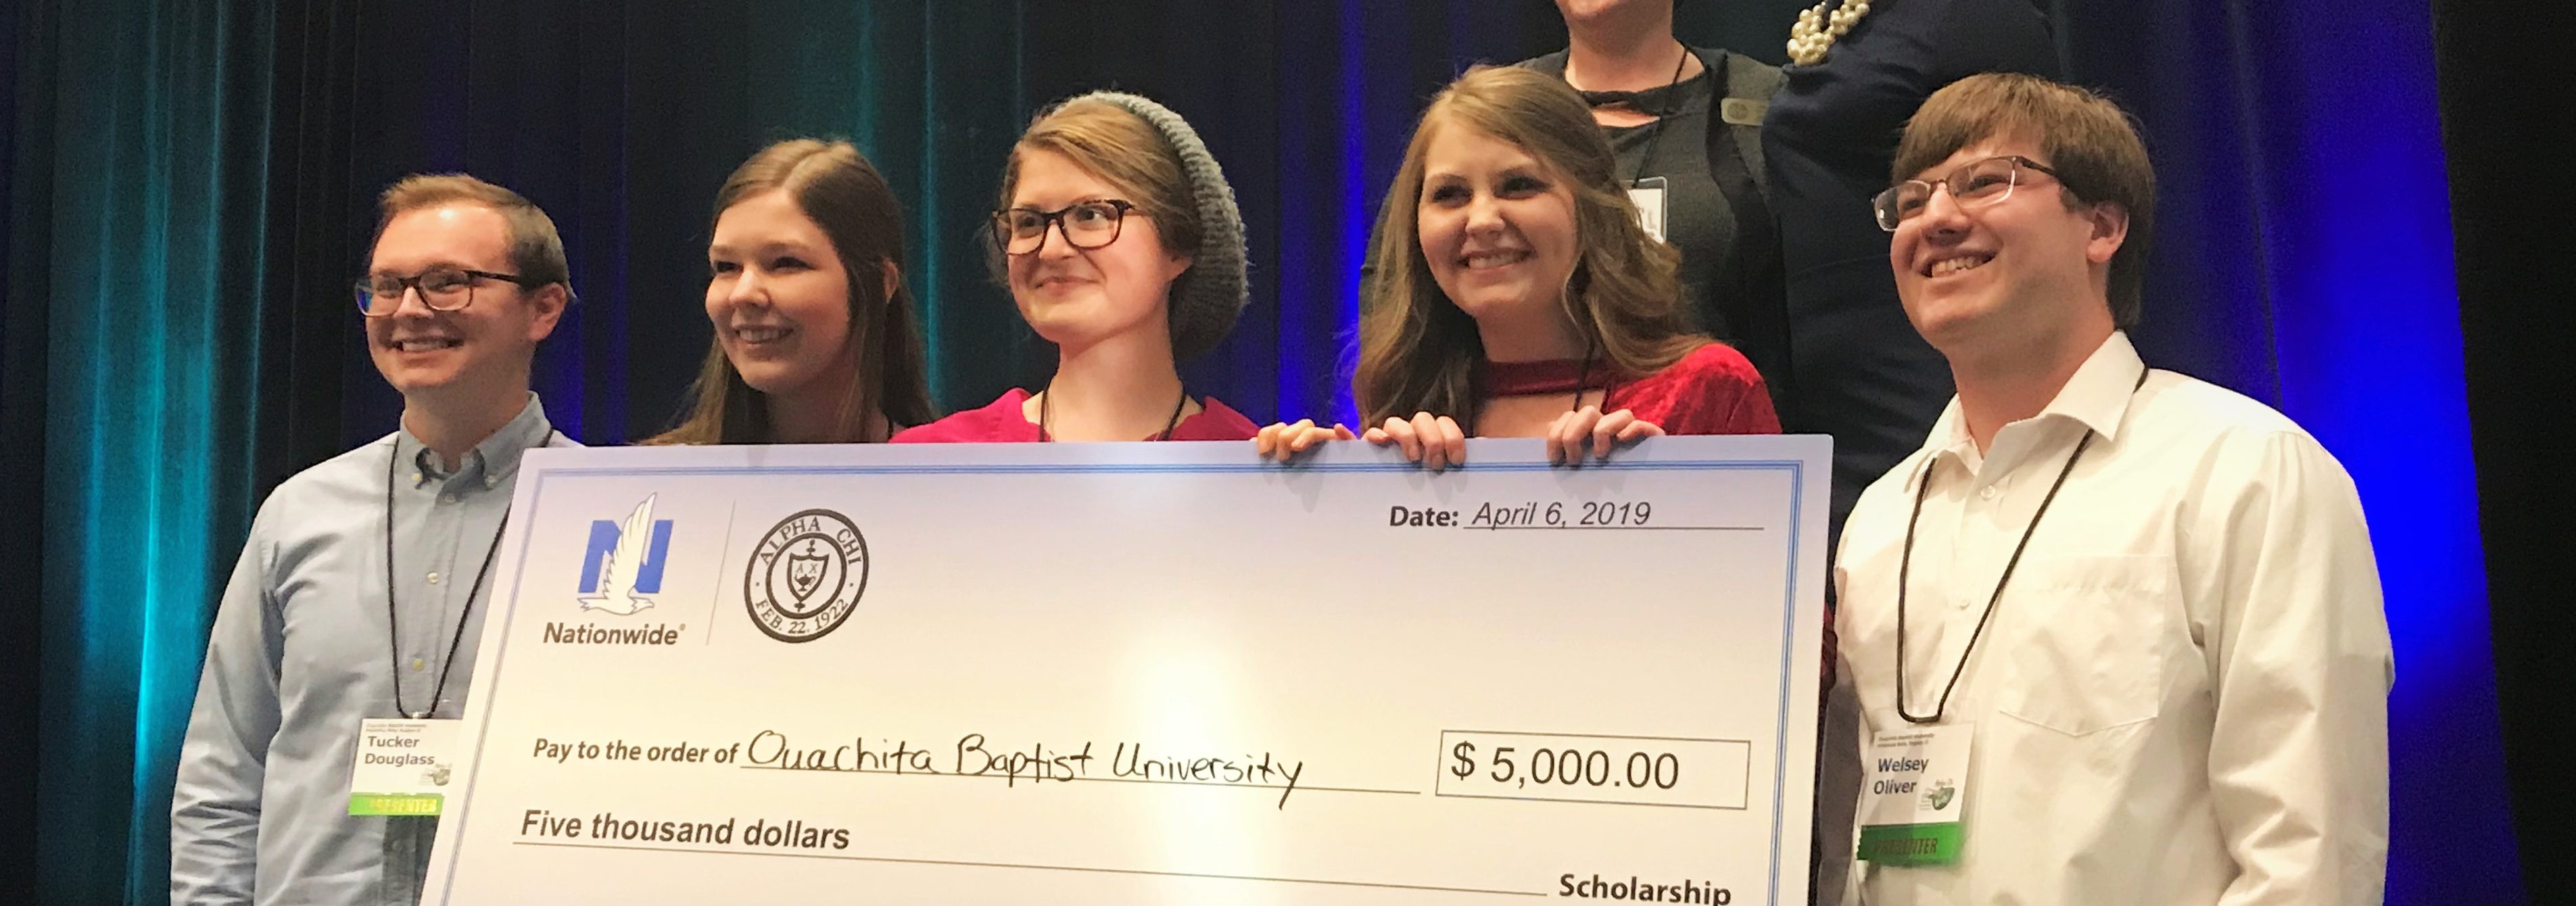 Ouachita students (from left) Tucker Douglass, Lauren Lovelady, Lesley Howard, Jessica Cook and Wesley Oliver received first place in the Collaborative Research Project competition at Alpha Chi’s national conference for their work “Art, Age and Apartheid.”